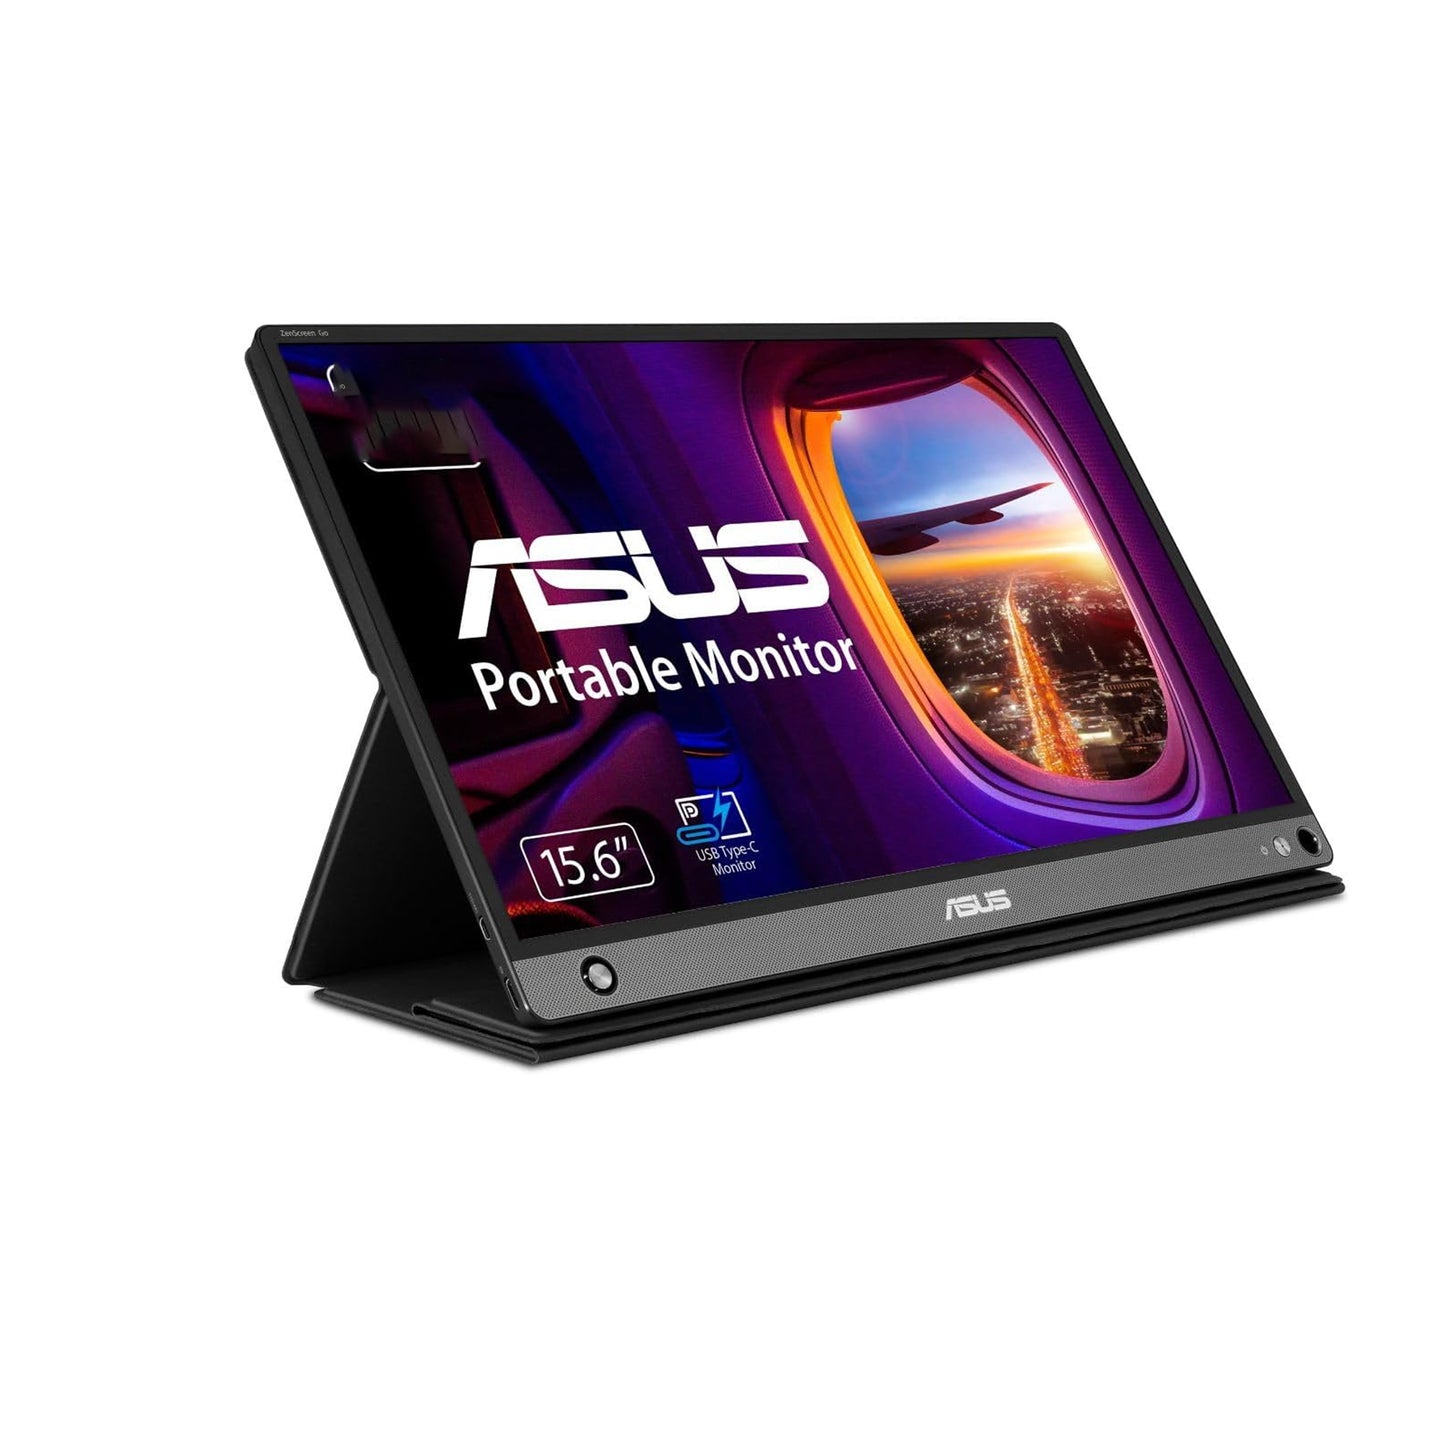 ASUS ZenScreen 15.6” 1080P Portable USB Monitor (MB16AHP) - Full HD, IPS, Eye Care, Micro HDMI, USB Type-C, Speakers, Built-in Battery, External Screen for Laptop